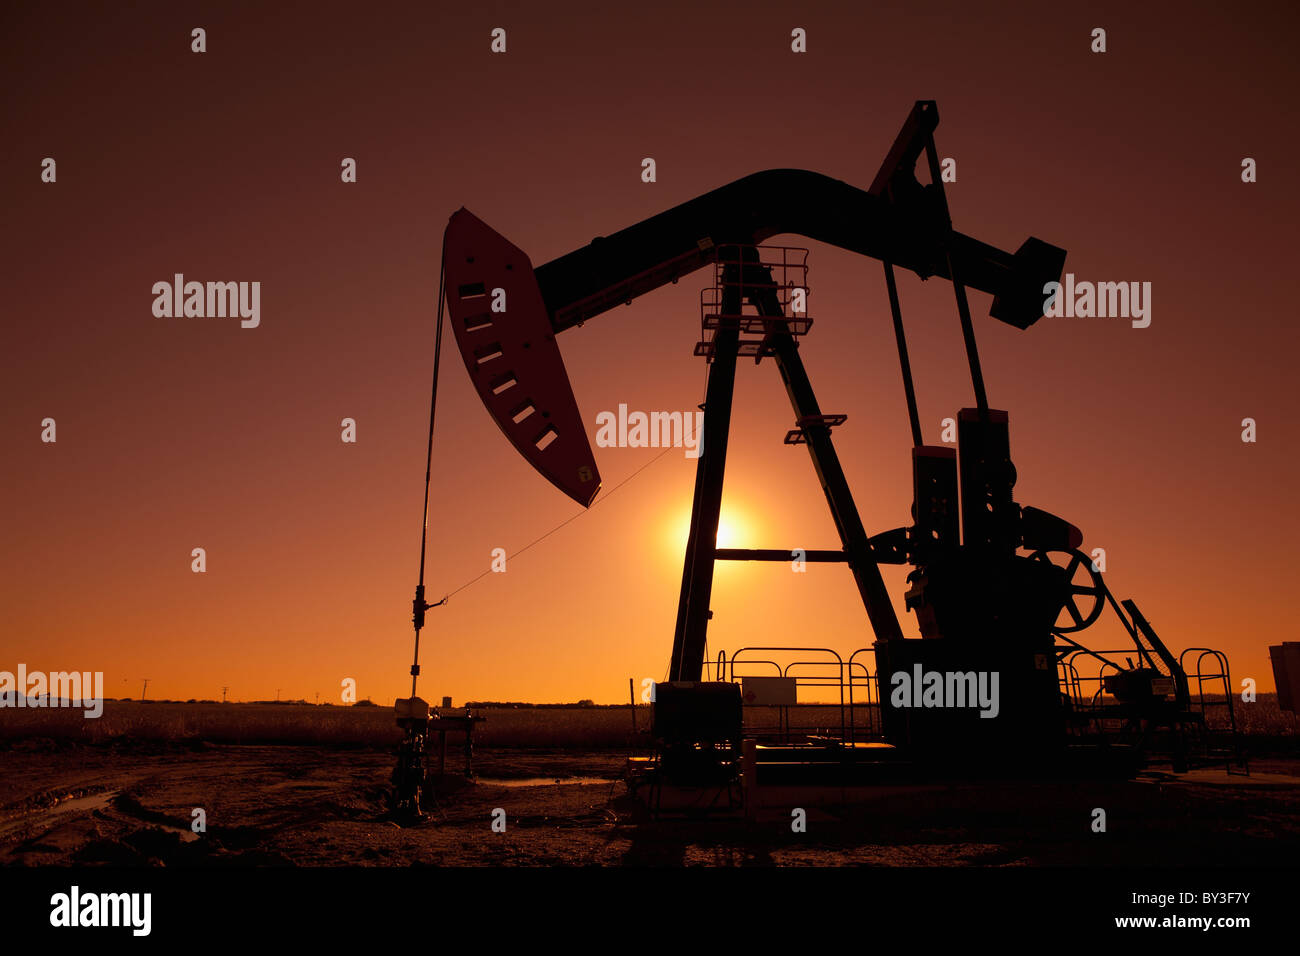 Silhouette of oil pump jack on rig Stock Photo